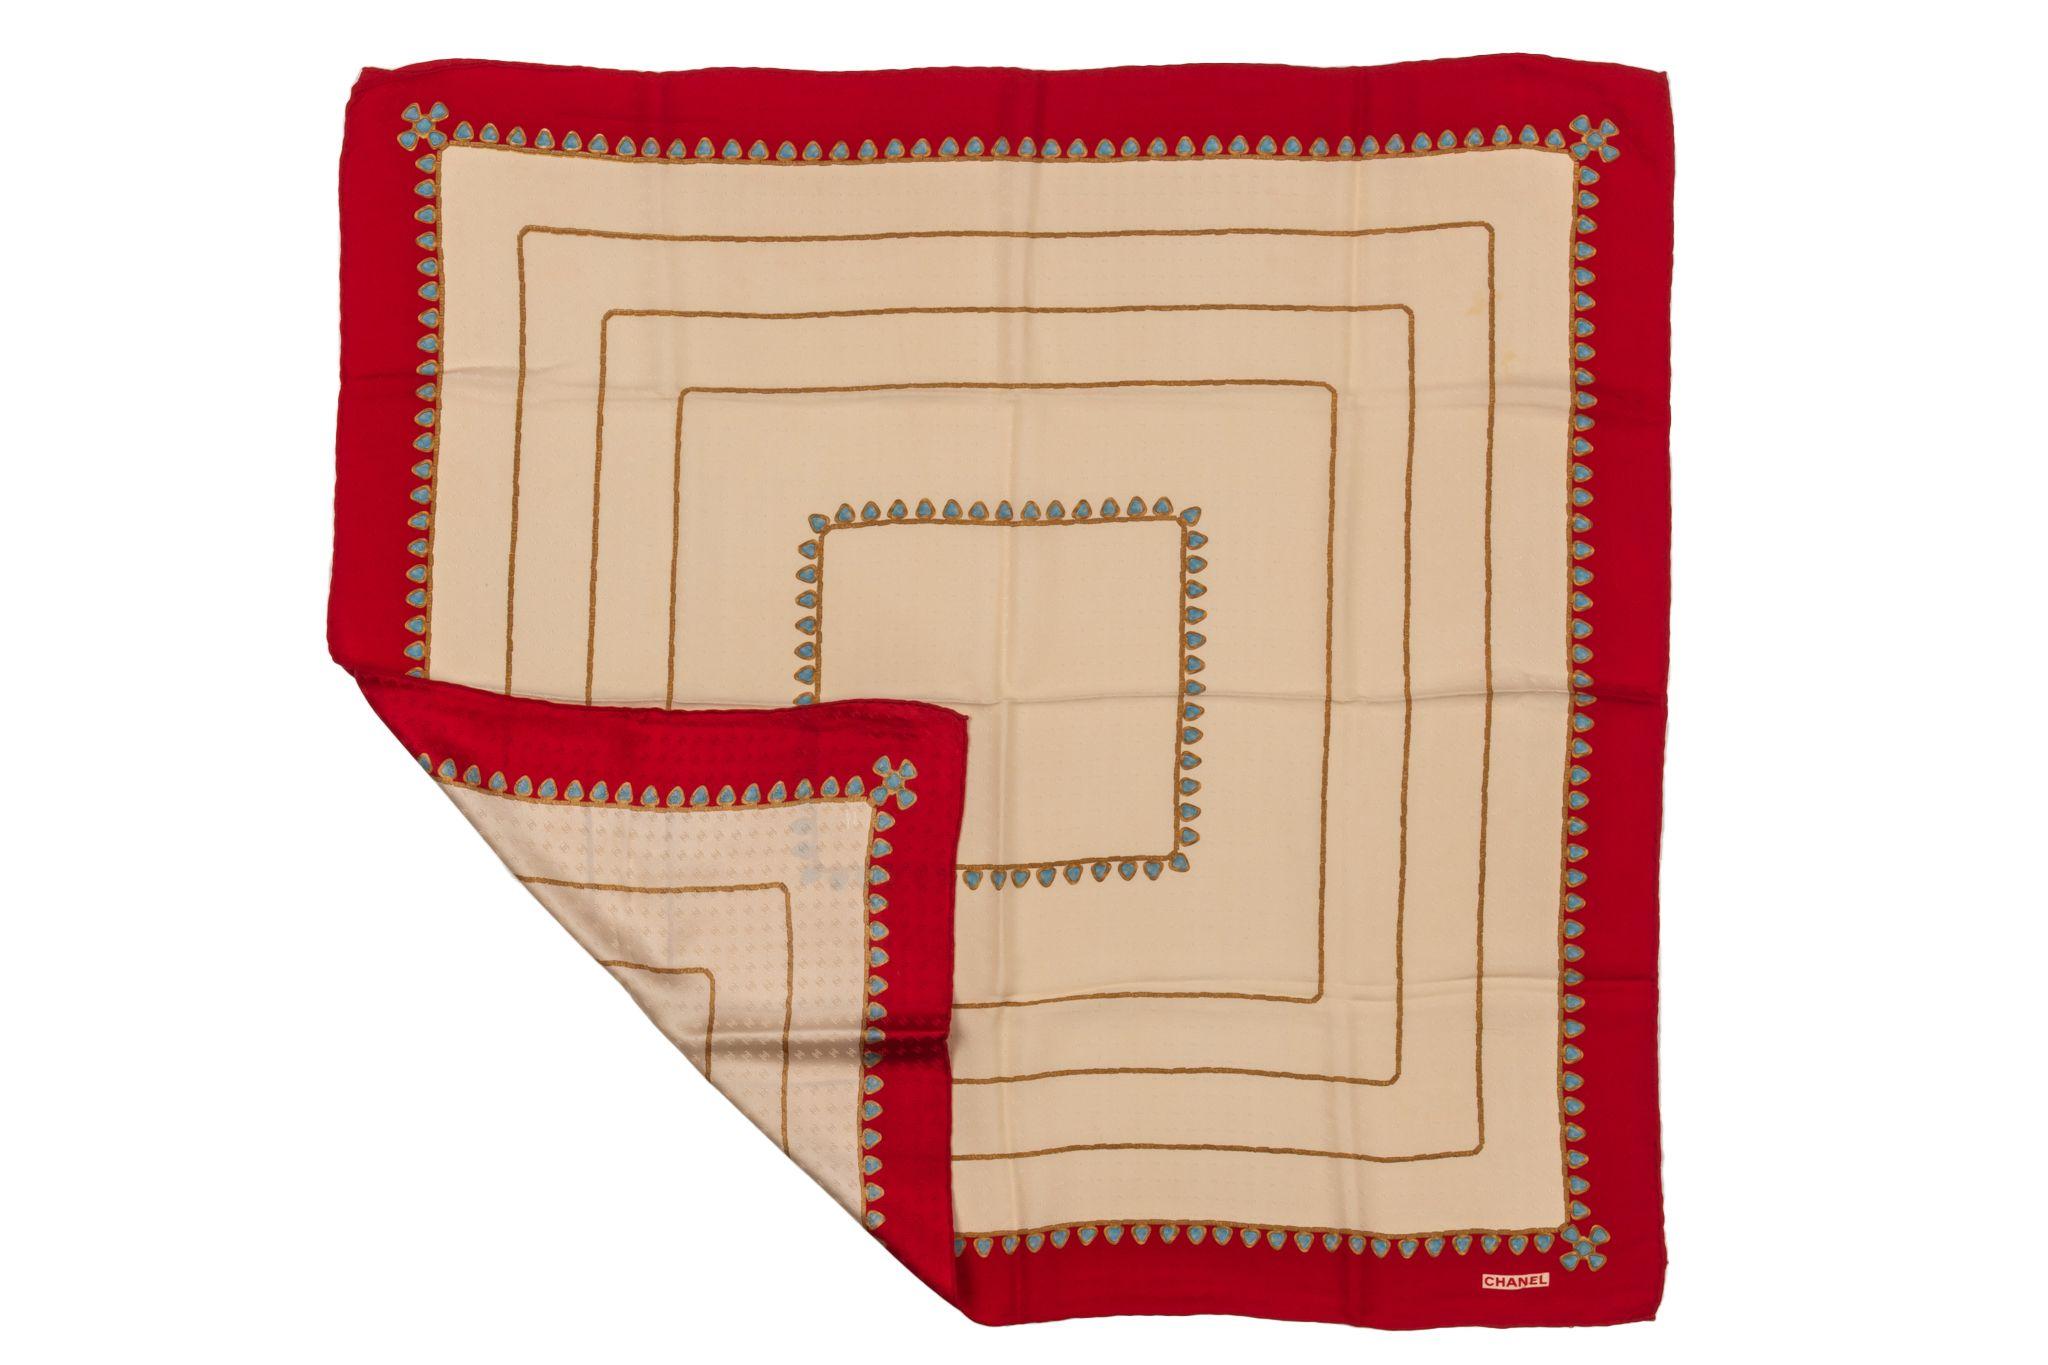 Chanel beige silk geometric squares scarf with a red frame. The piece is in excellent condition and features gripoix jewelry design.